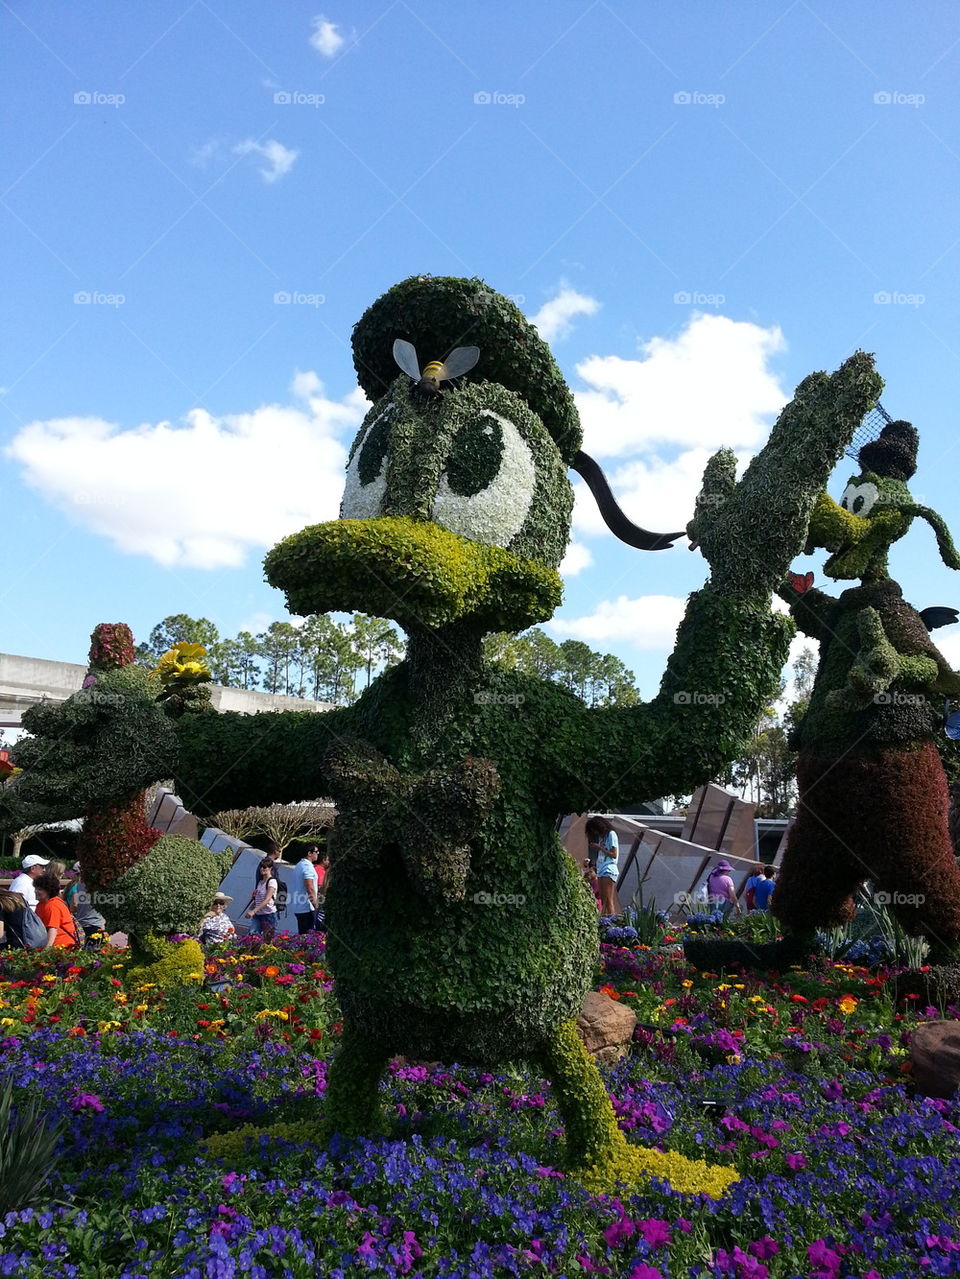 Donald Duck Topiary - Epcot Flower and Garden Festival